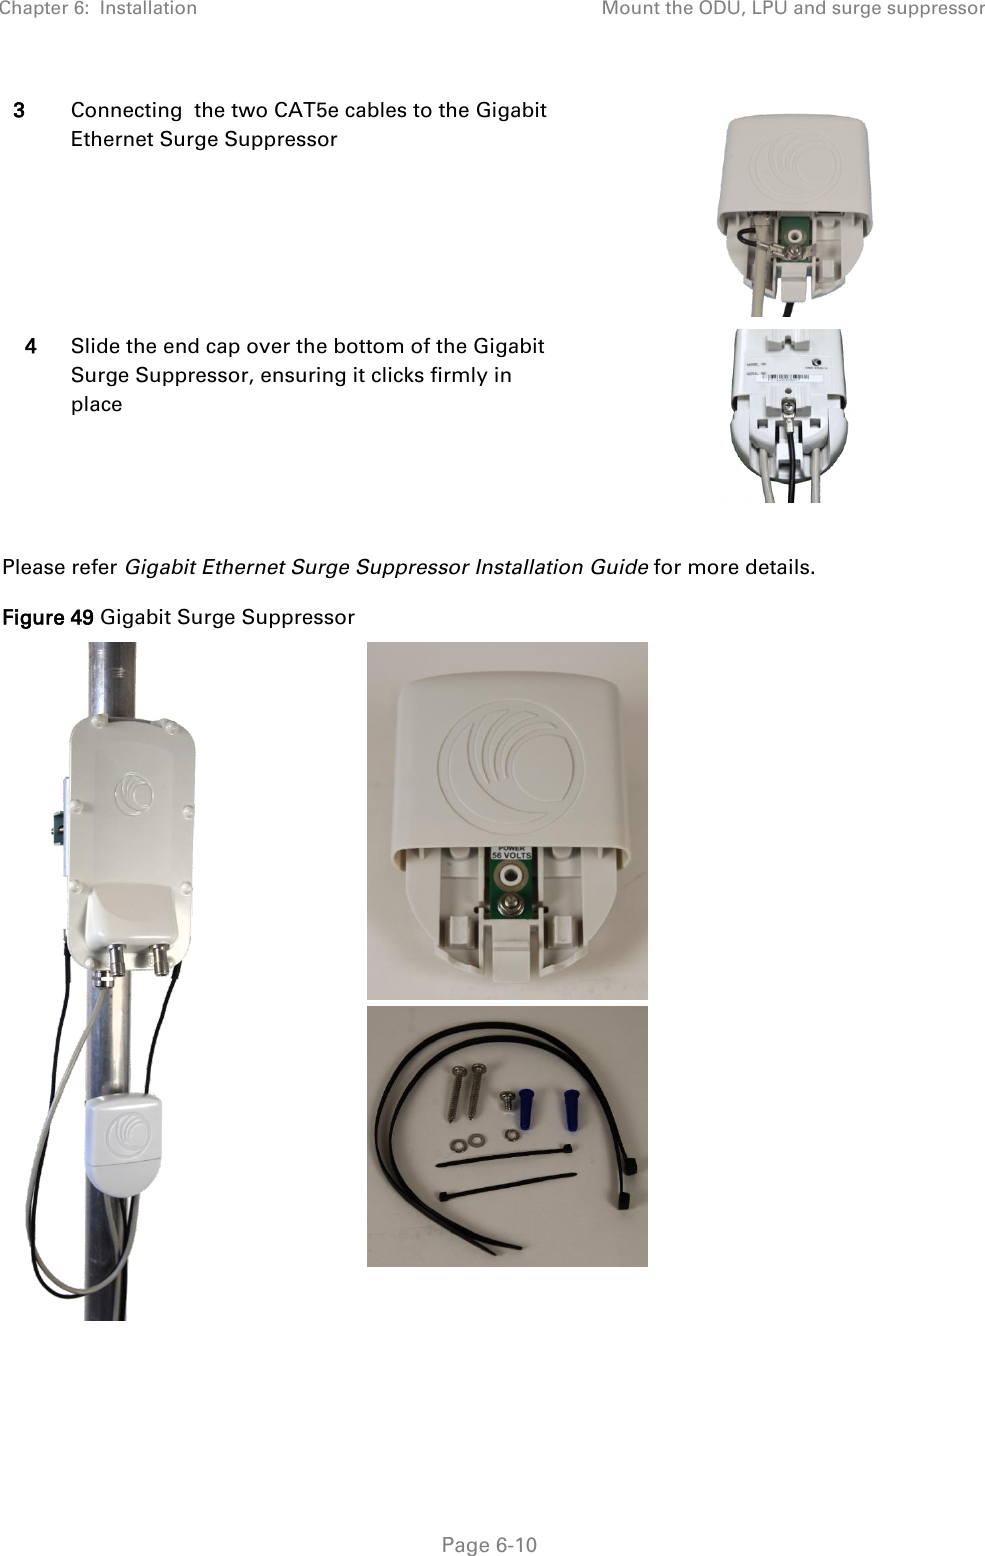 Chapter 6:  Installation Mount the ODU, LPU and surge suppressor   Page 6-10 3 Connecting  the two CAT5e cables to the Gigabit Ethernet Surge Suppressor  4 Slide the end cap over the bottom of the Gigabit Surge Suppressor, ensuring it clicks firmly in place   Please refer Gigabit Ethernet Surge Suppressor Installation Guide for more details. Figure 49 Gigabit Surge Suppressor      